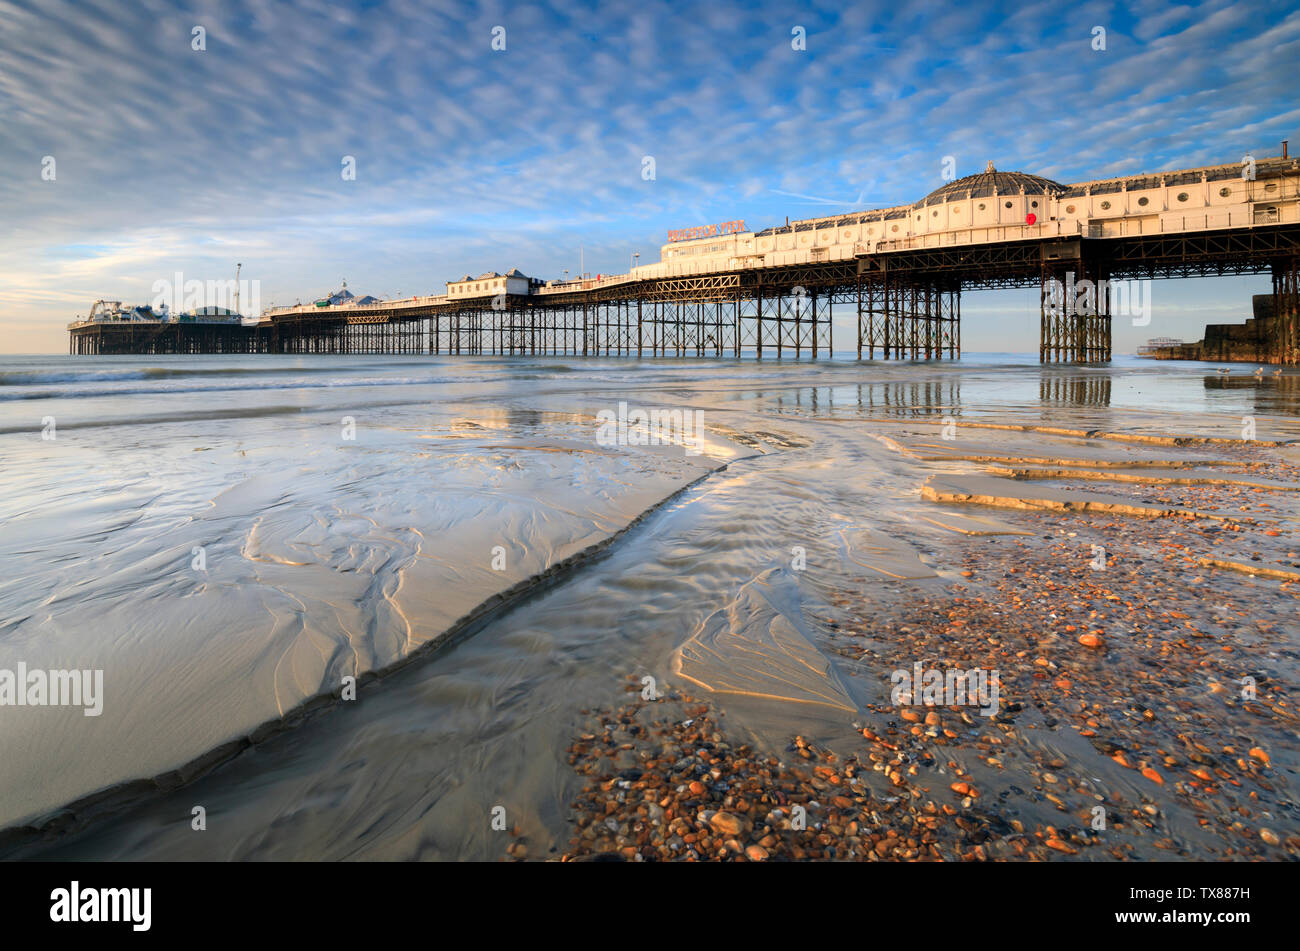 The Palace Pier at Brighton captured at low tide. Stock Photo